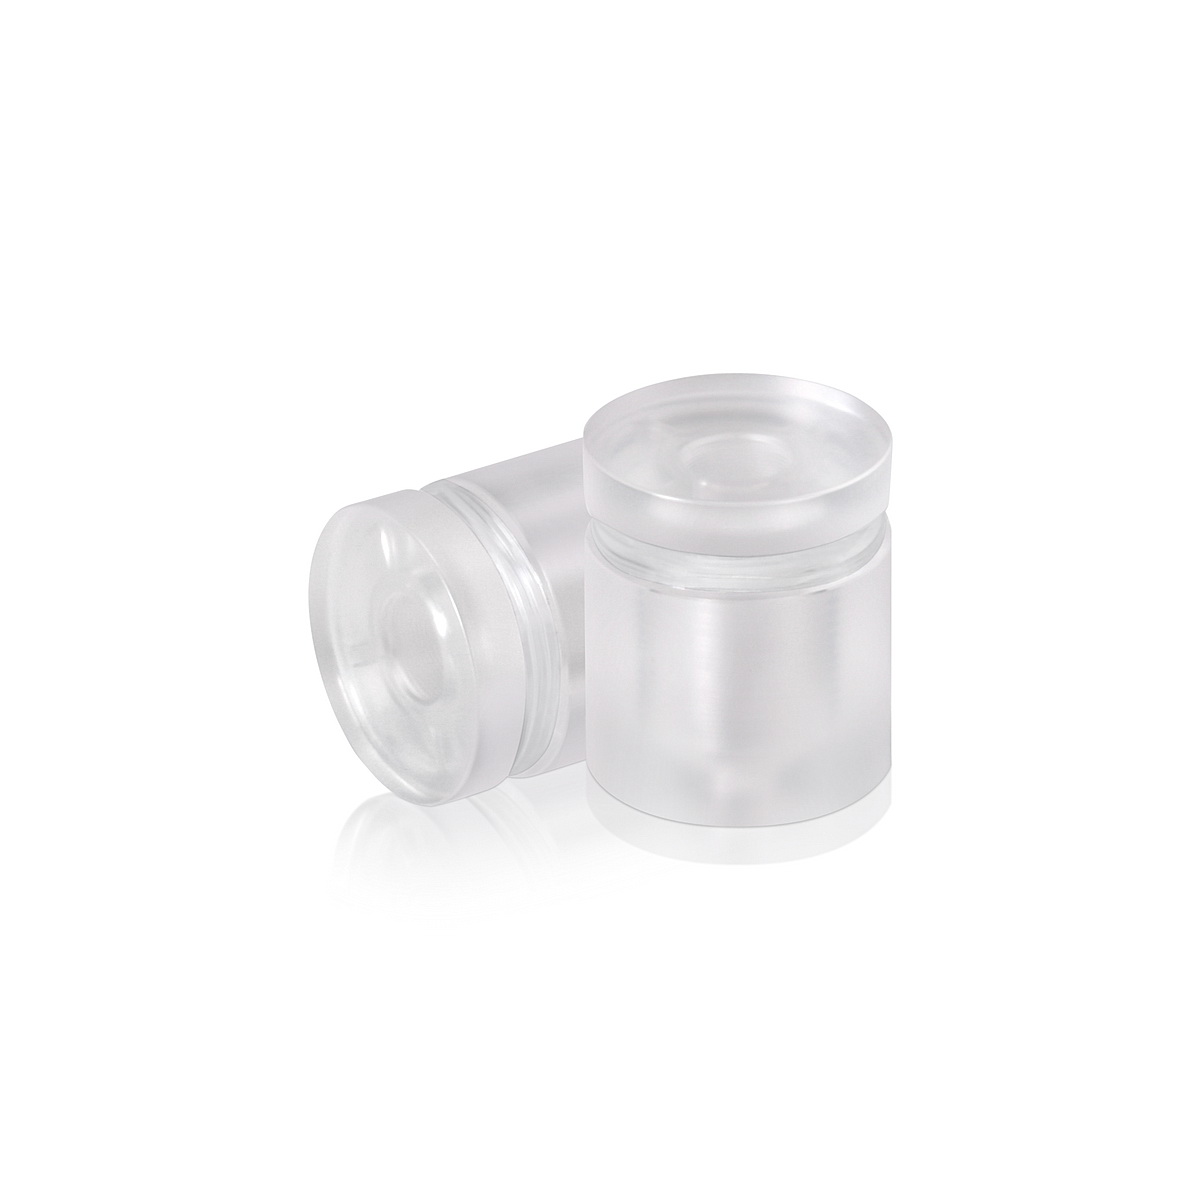 1'' Diameter X 2-1/2'' Barrel Length, Clear Acrylic Standoff. Easy Fasten Standoff (For Inside Use Only) Tamper Proof [Required Material Hole Size: 7/16'']